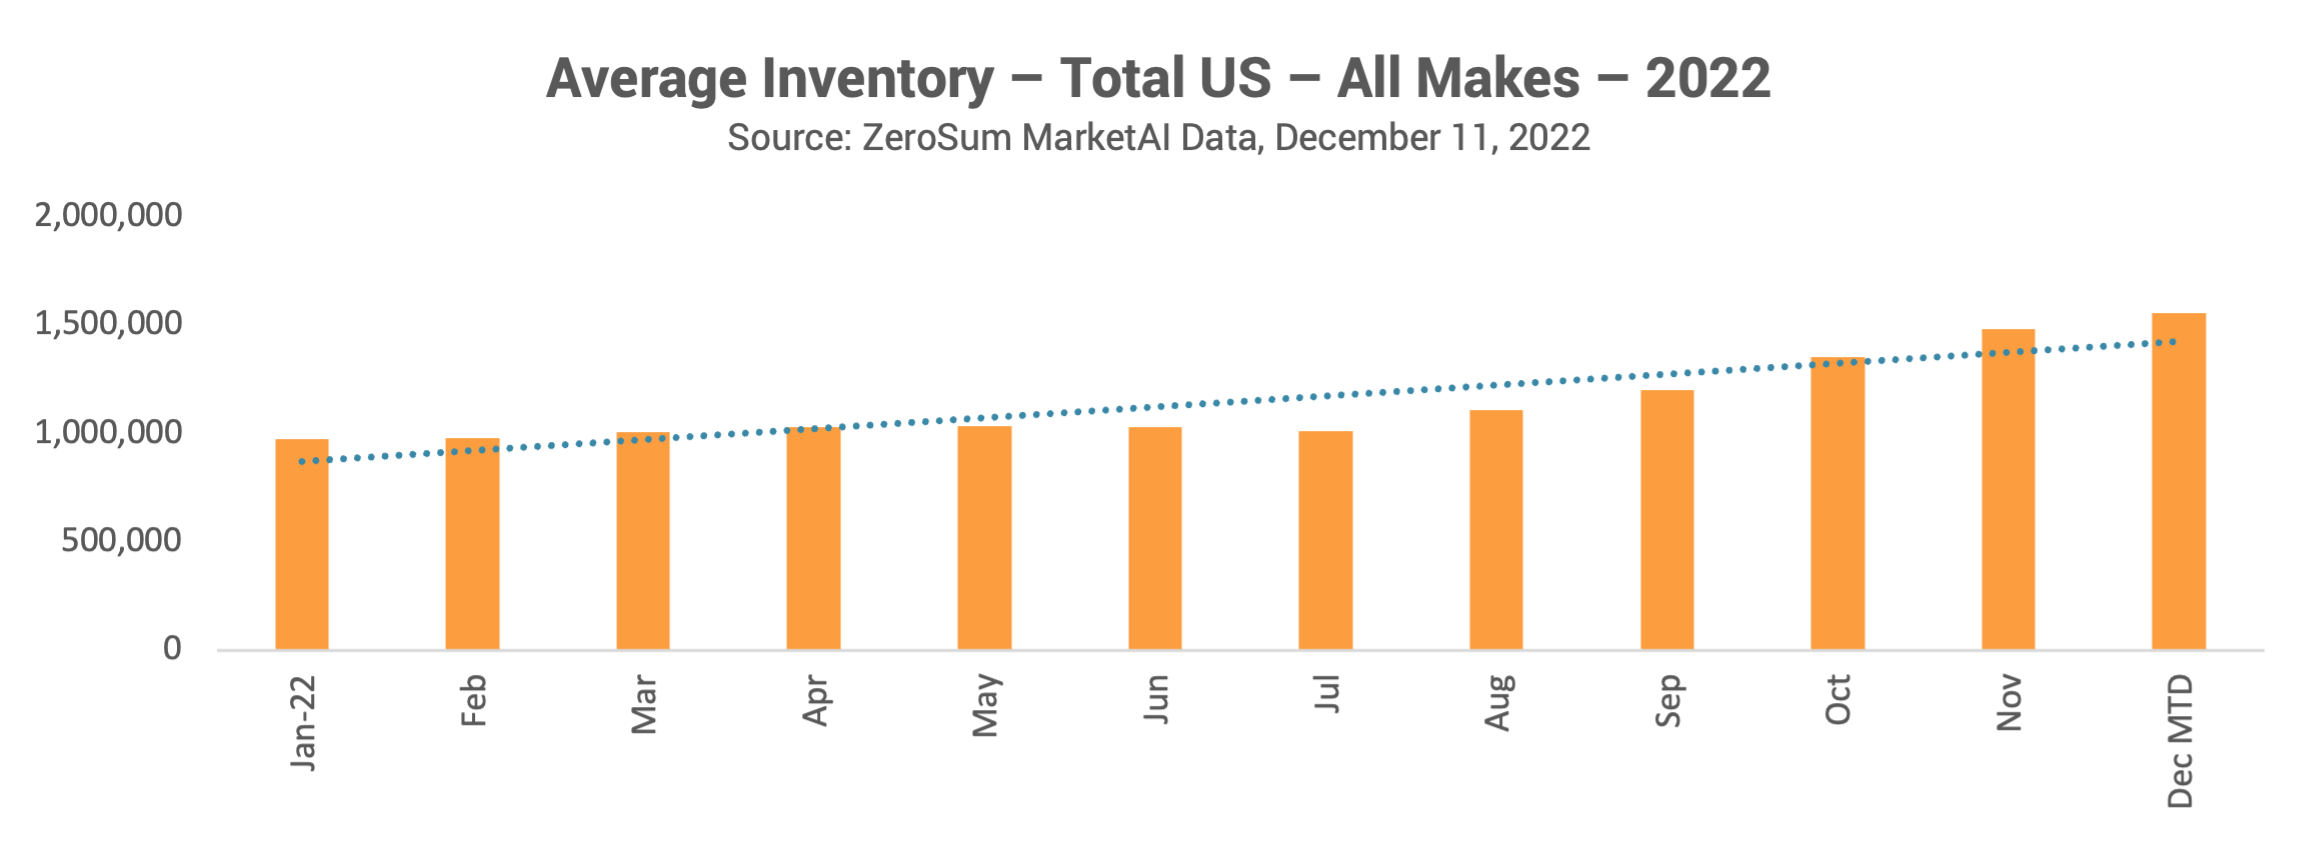 Average Inventory Total US All Makes